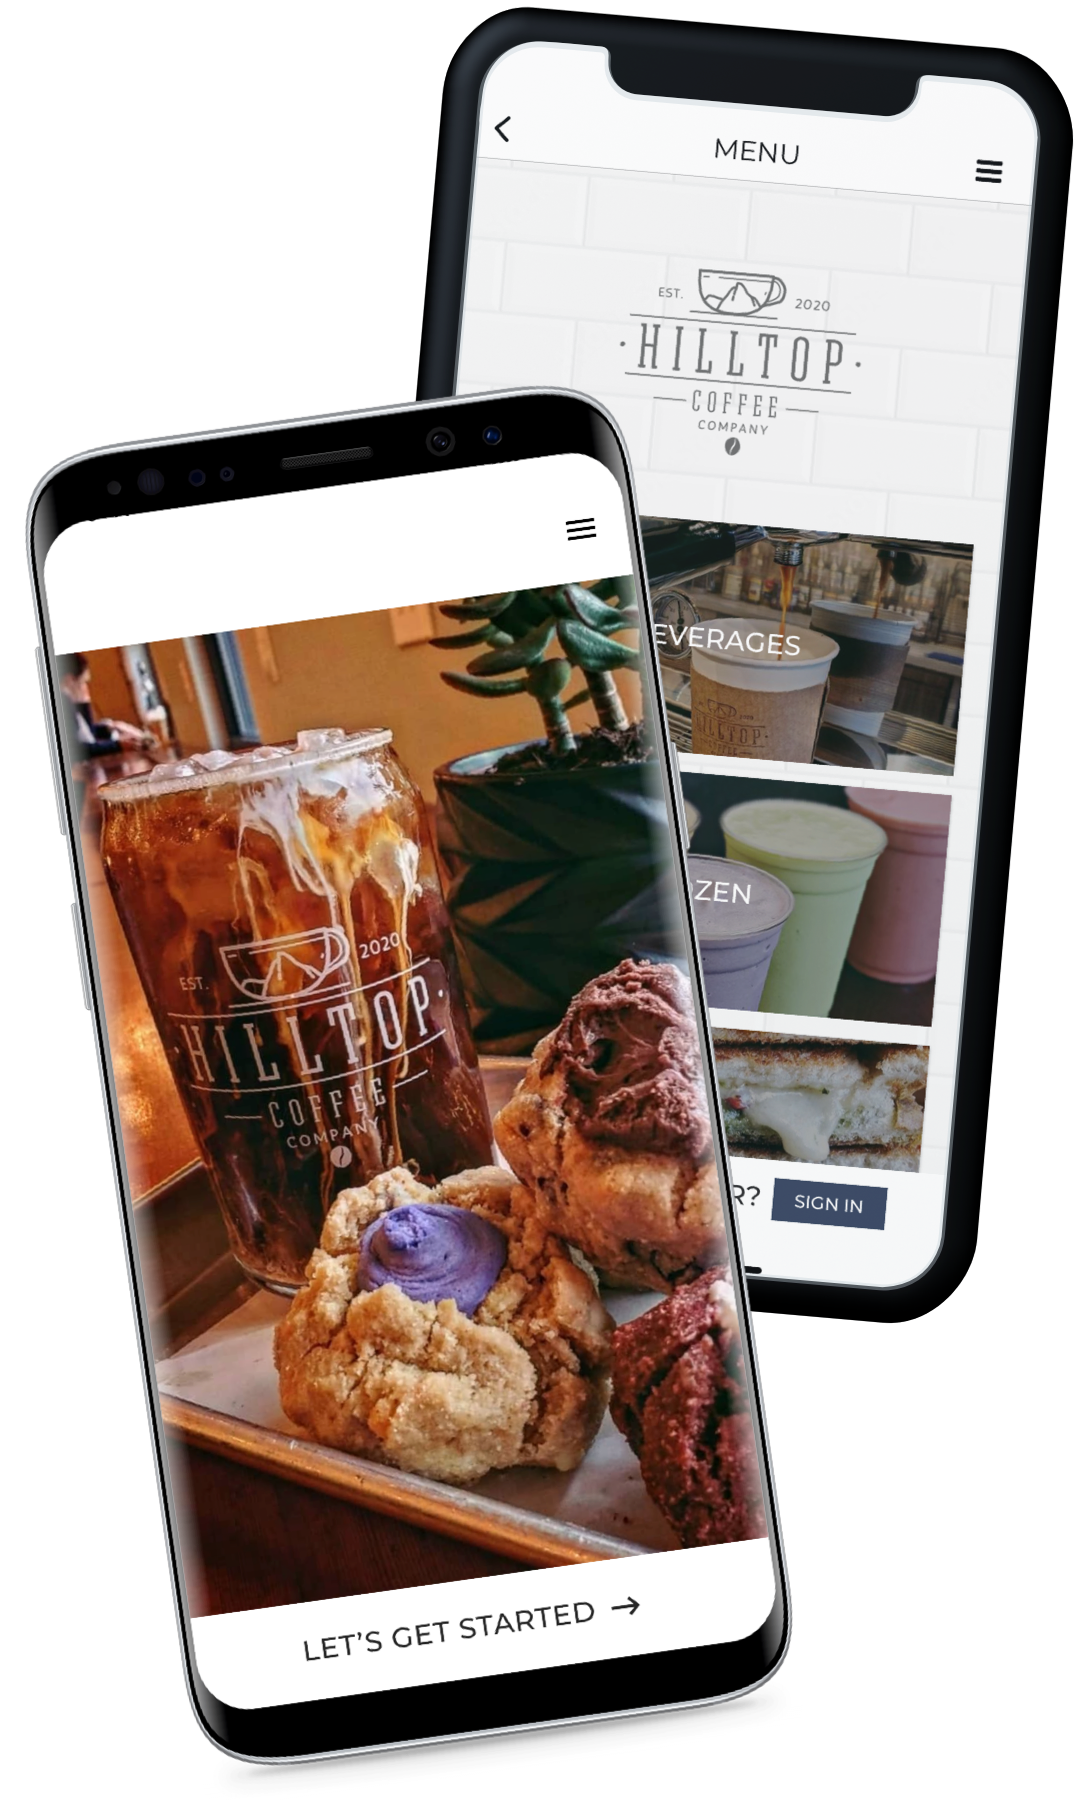 Two iPhones showing the Hilltop Coffee App splash page and menu page